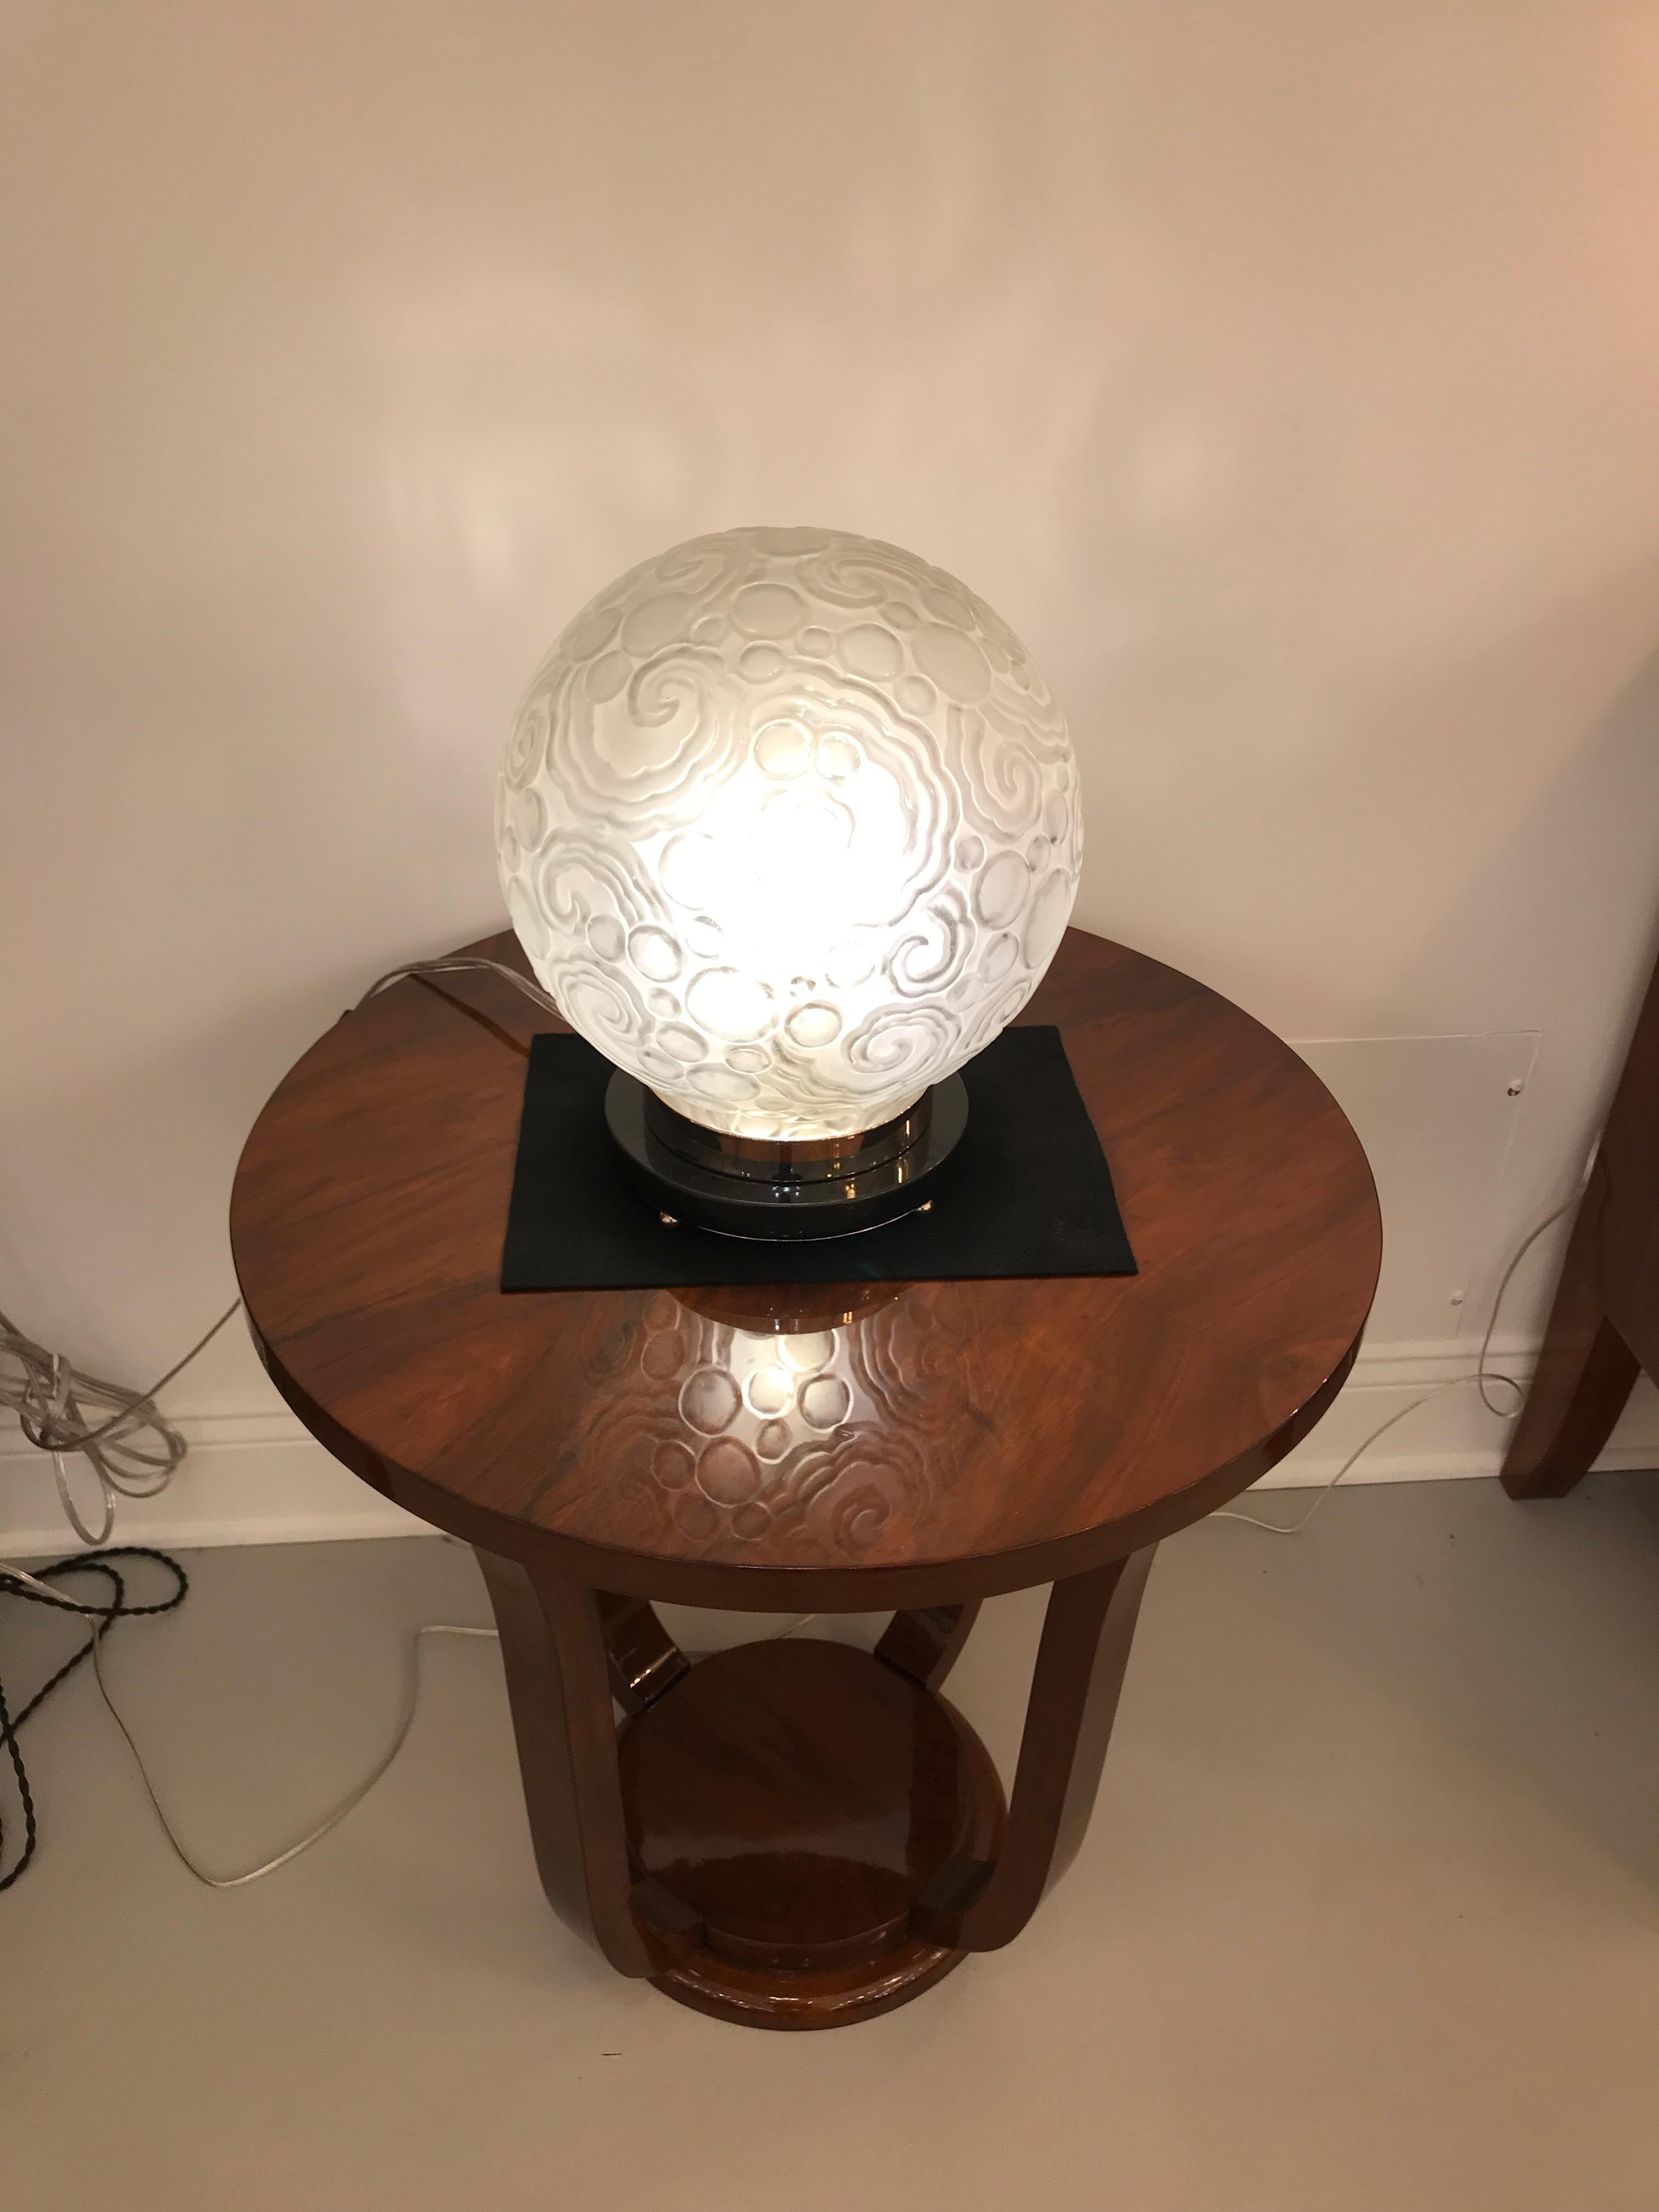 French Art Deco Table Lamp by Sabino with Geometric Motif For Sale 5